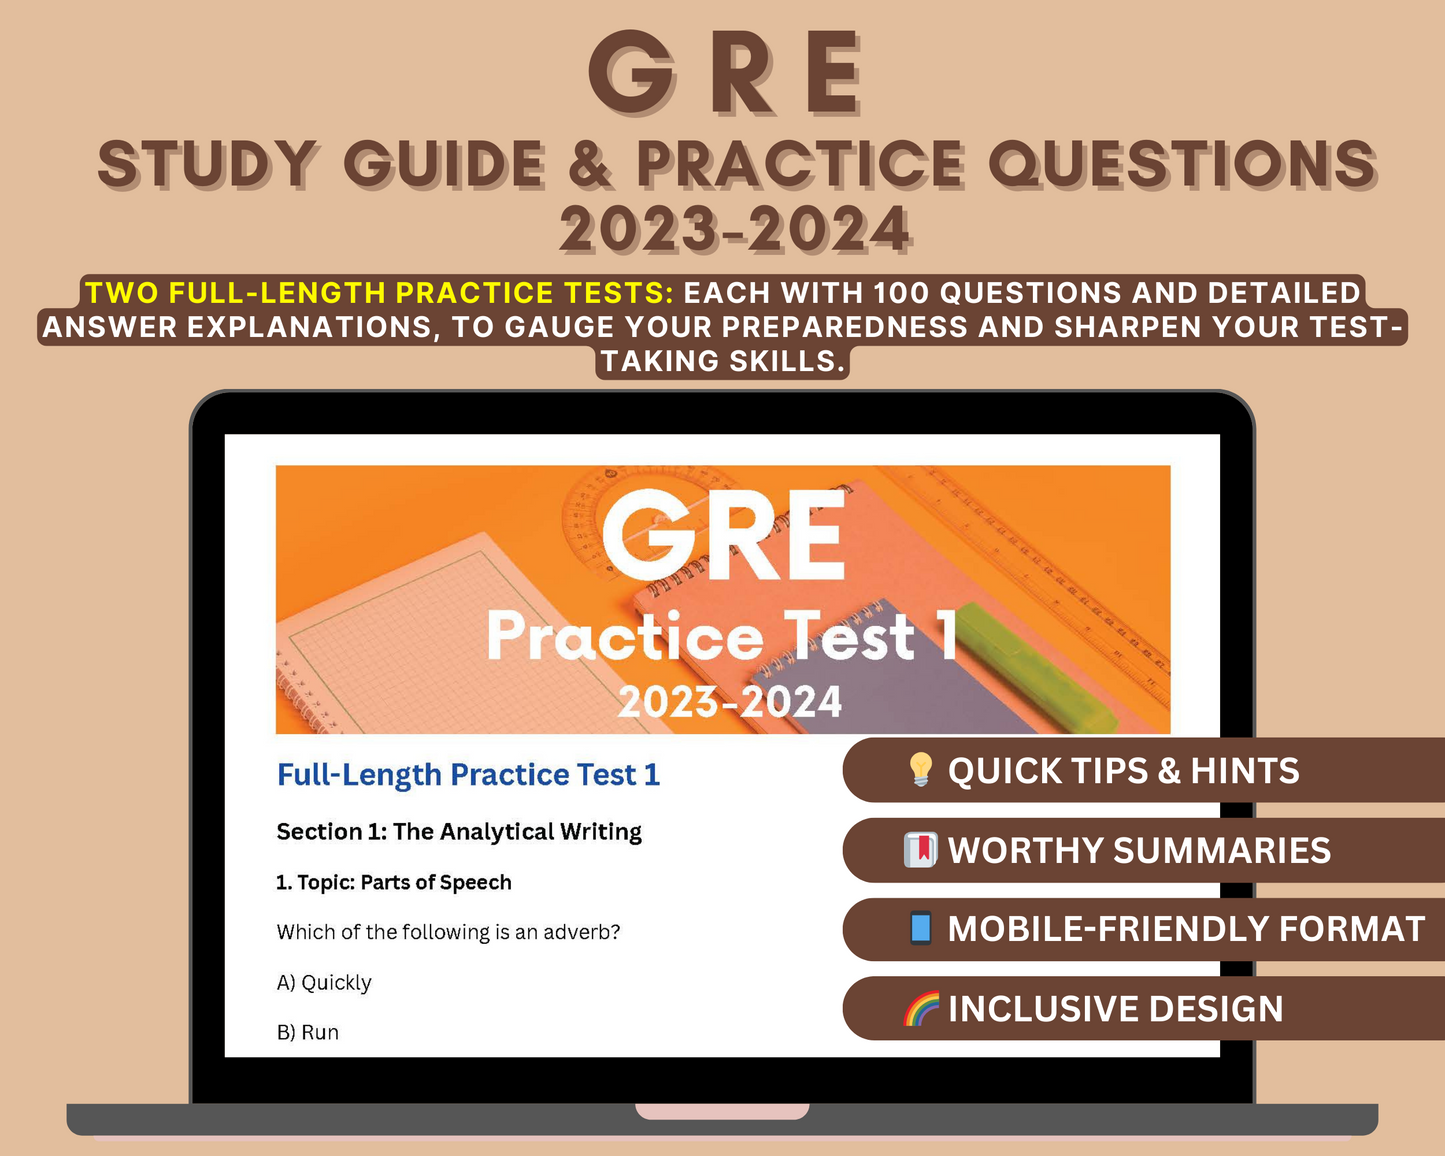 GRE Exam Study Guide 2023-2024 by Test Treasure Publication: Master Analytical Writing, Verbal & Quantitative Reasoning